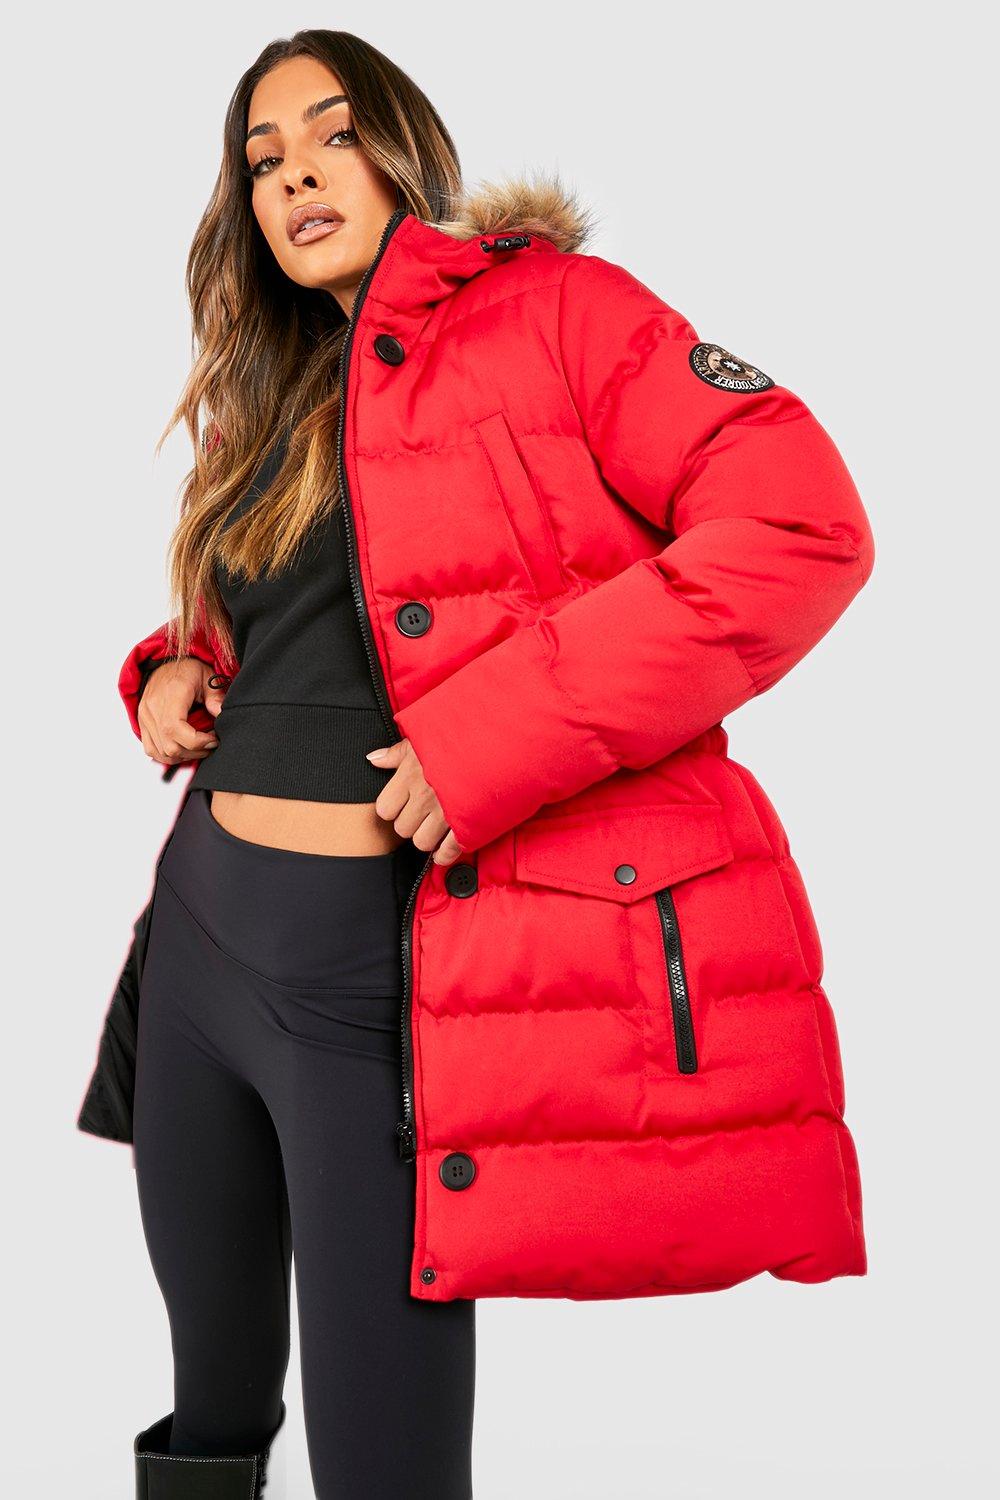 Womens Luxe Mountaineering Parka Coat - Red - 8, Red